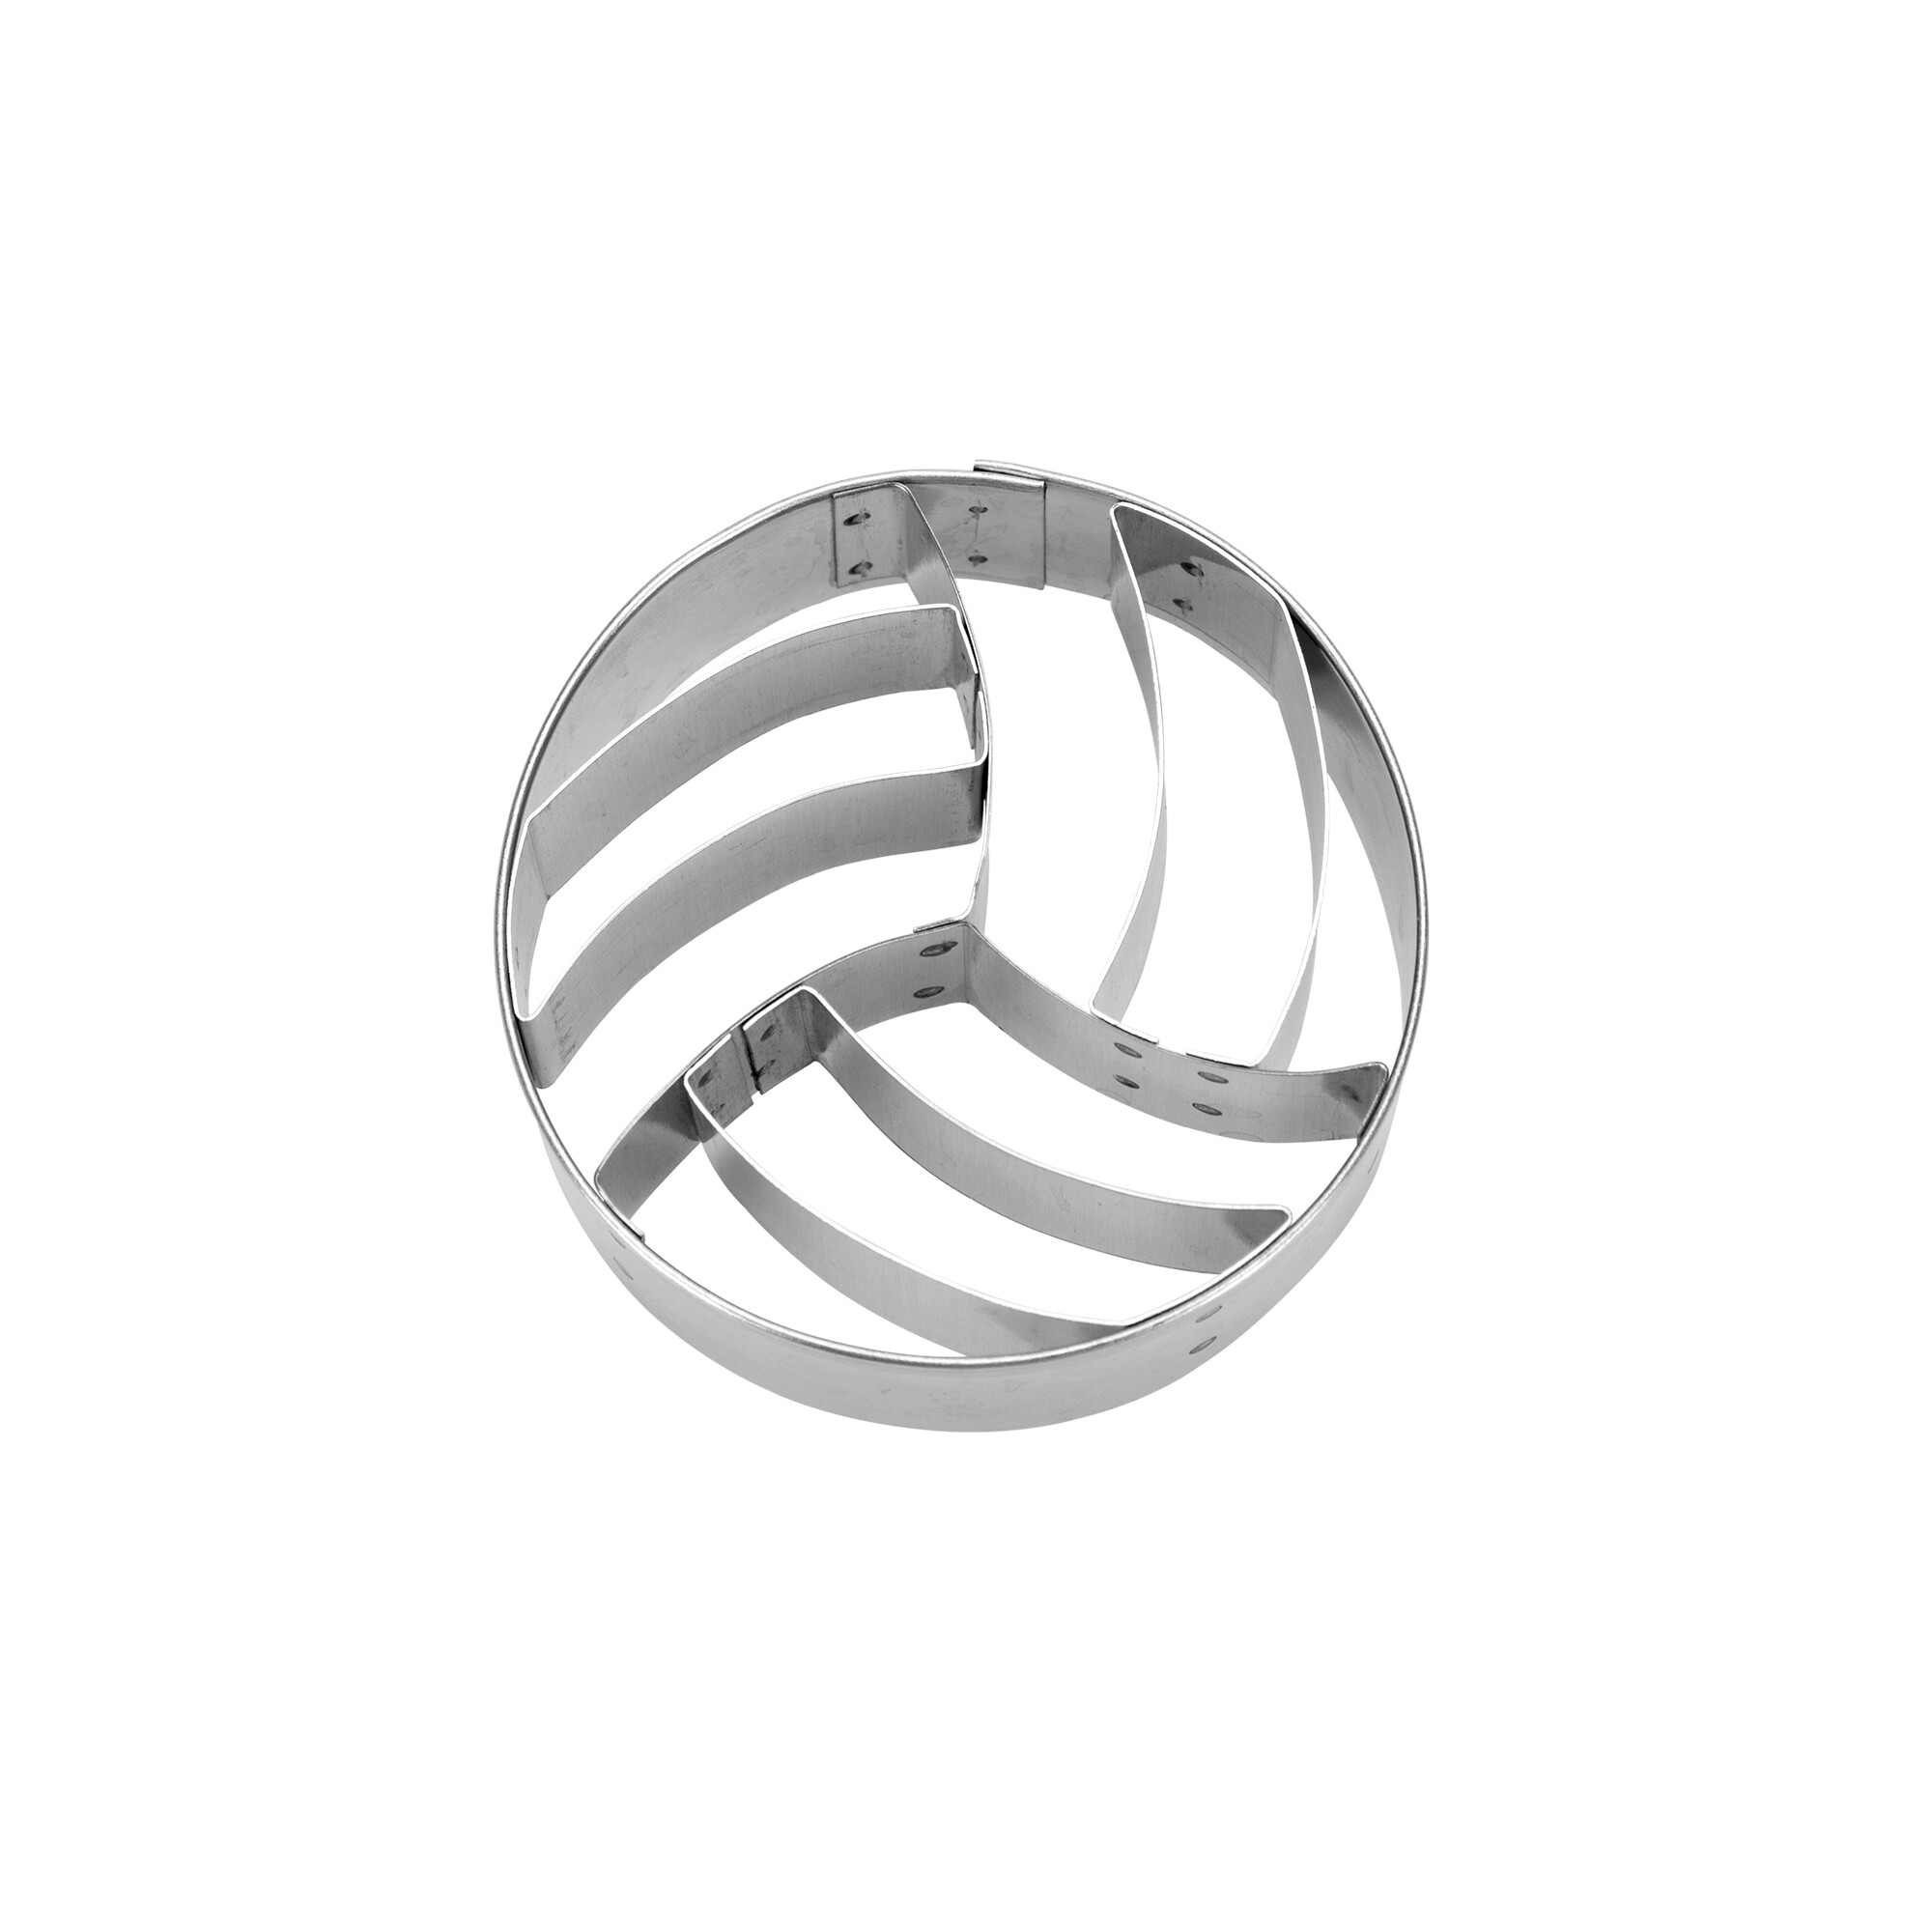 Cookie cutter with stamp – Volley ball